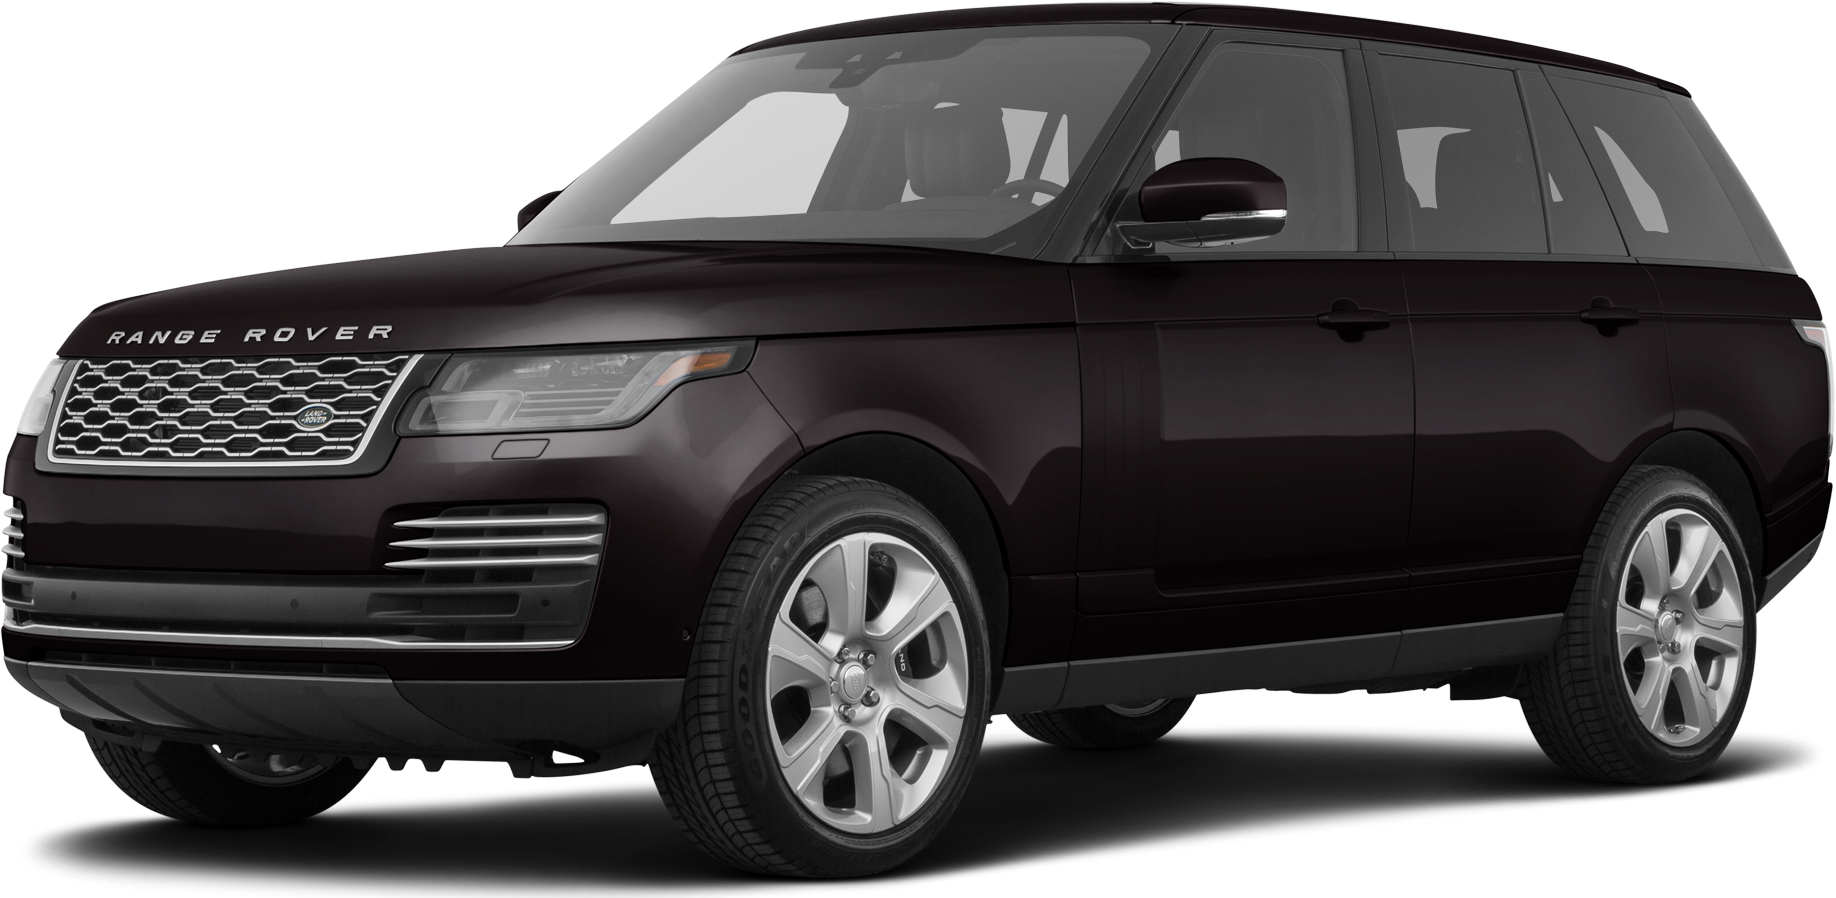 2018 Land Rover Range Rover Values & Cars for Sale | Kelley Blue Book